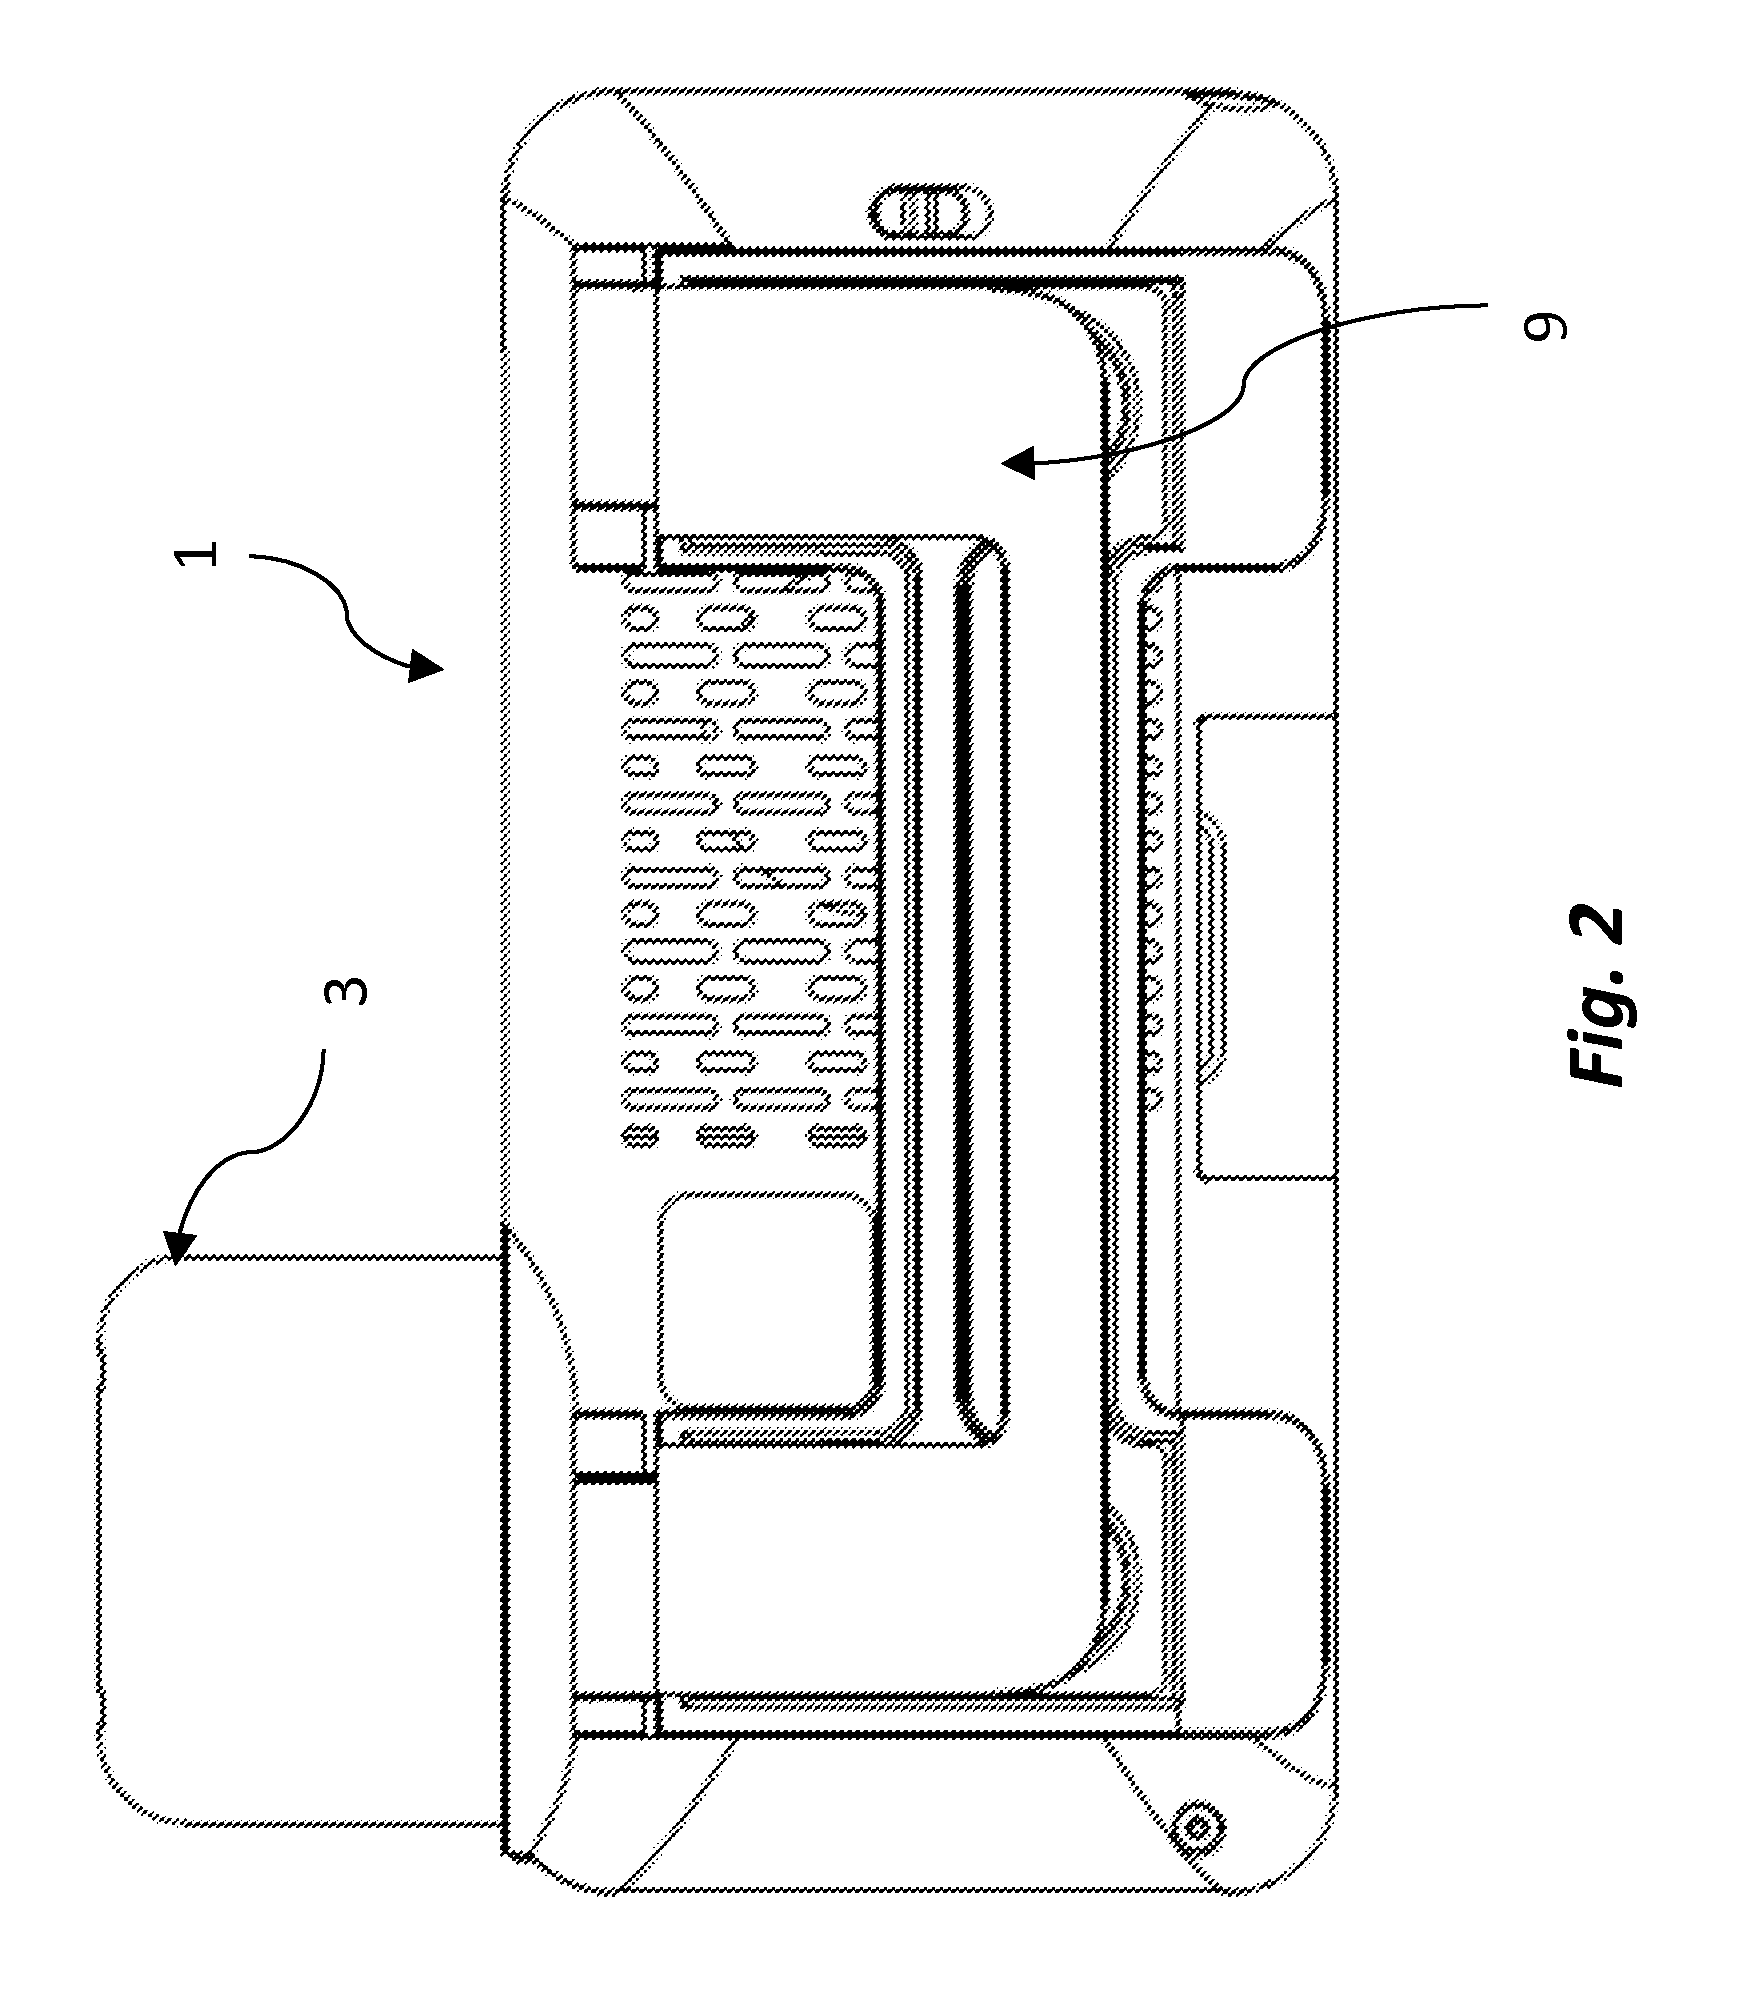 Vehicle Mounted Cradle and Sound Amplifier for a Personal Communication Device